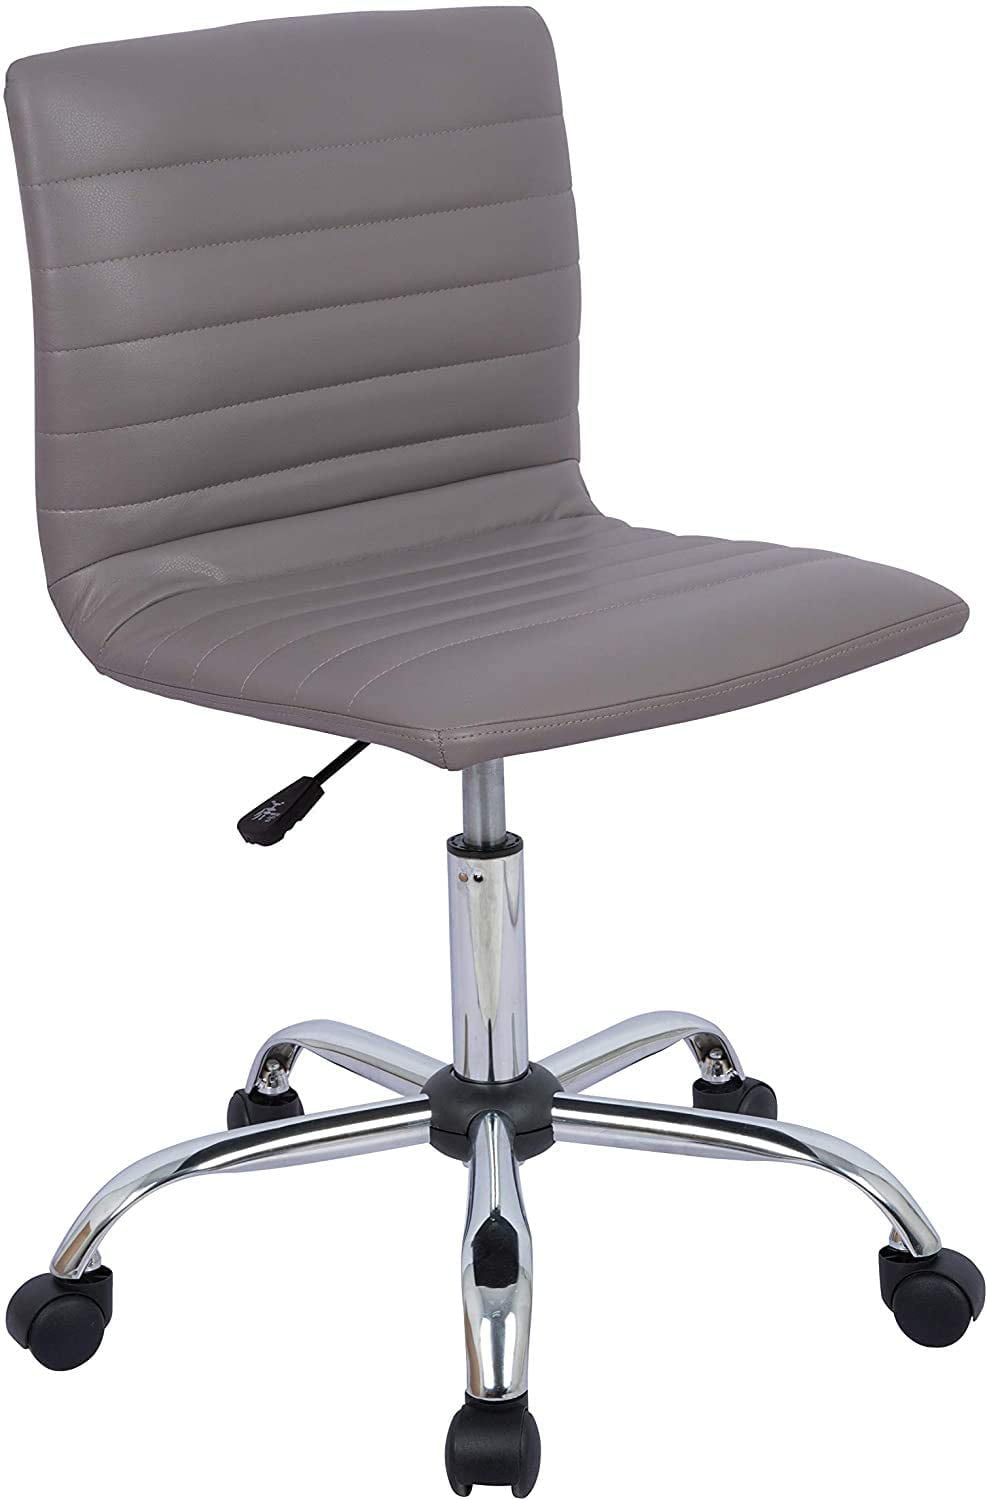 Computer Chair Adjustable Height Ribbed Low Back Armless Swivel Conference Room Task Desk Chairs White Home Office Chair